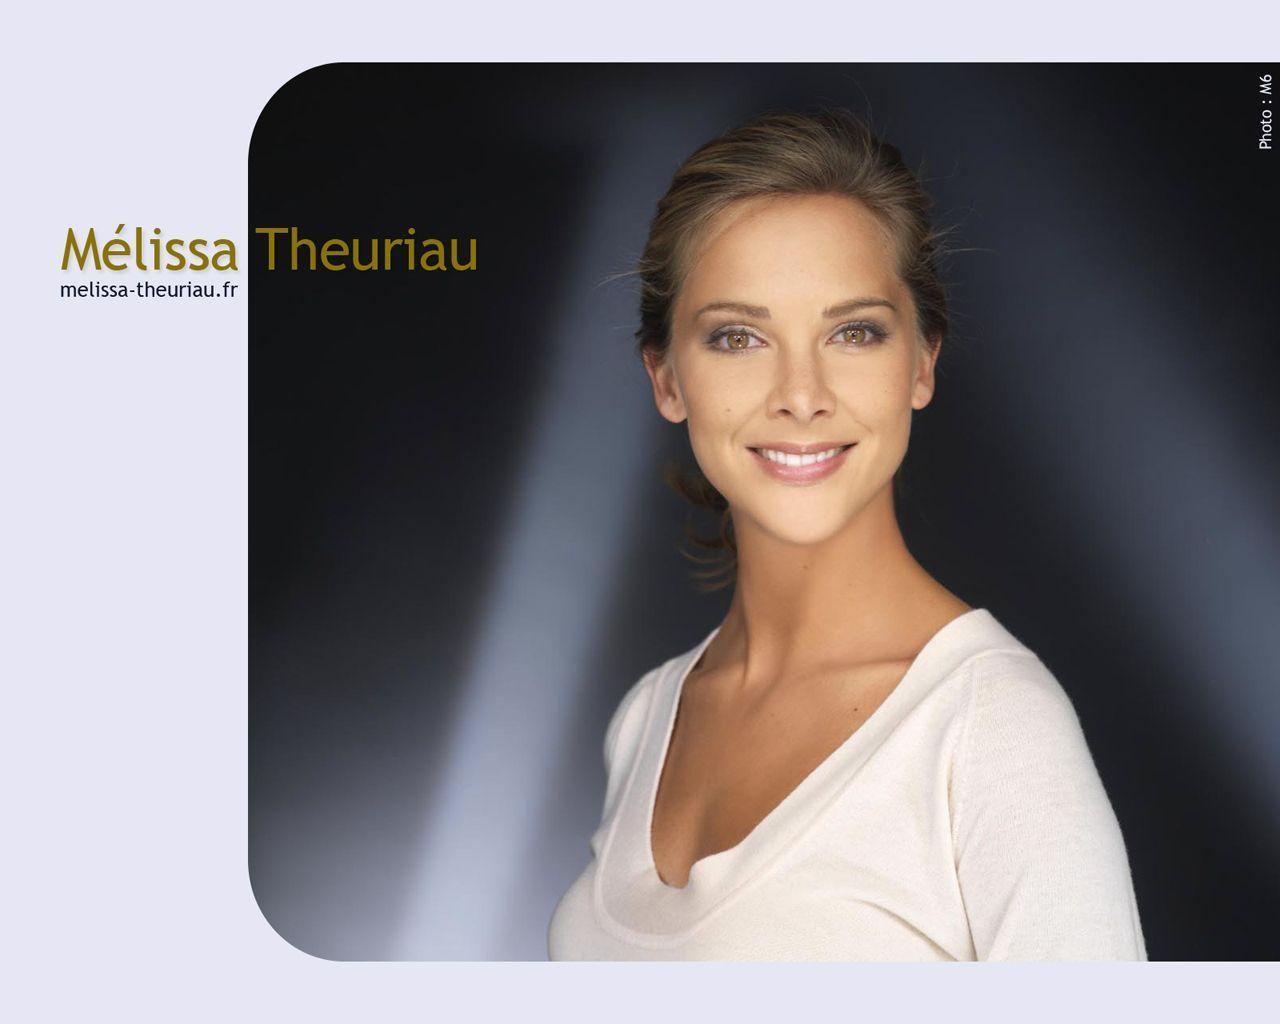 Melissa Theuriau, News, Information from